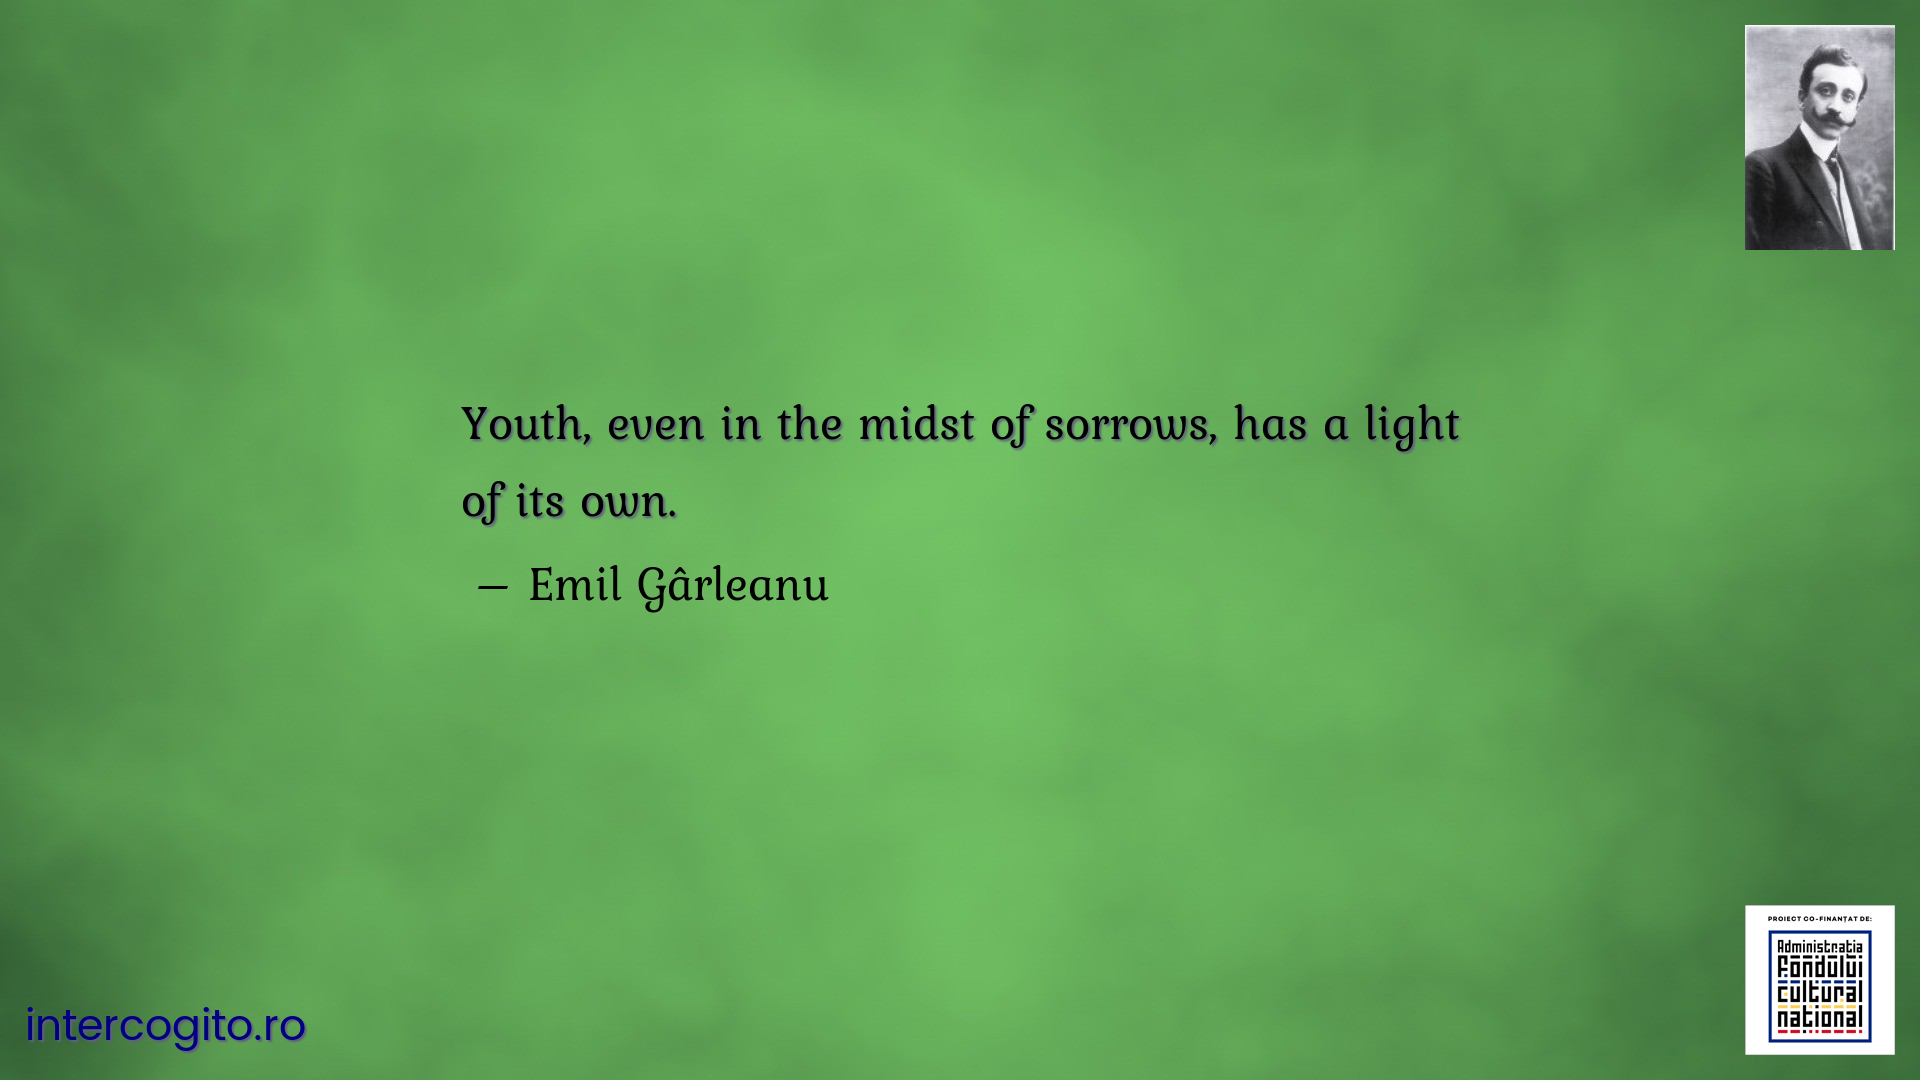 Youth, even in the midst of sorrows, has a light of its own.